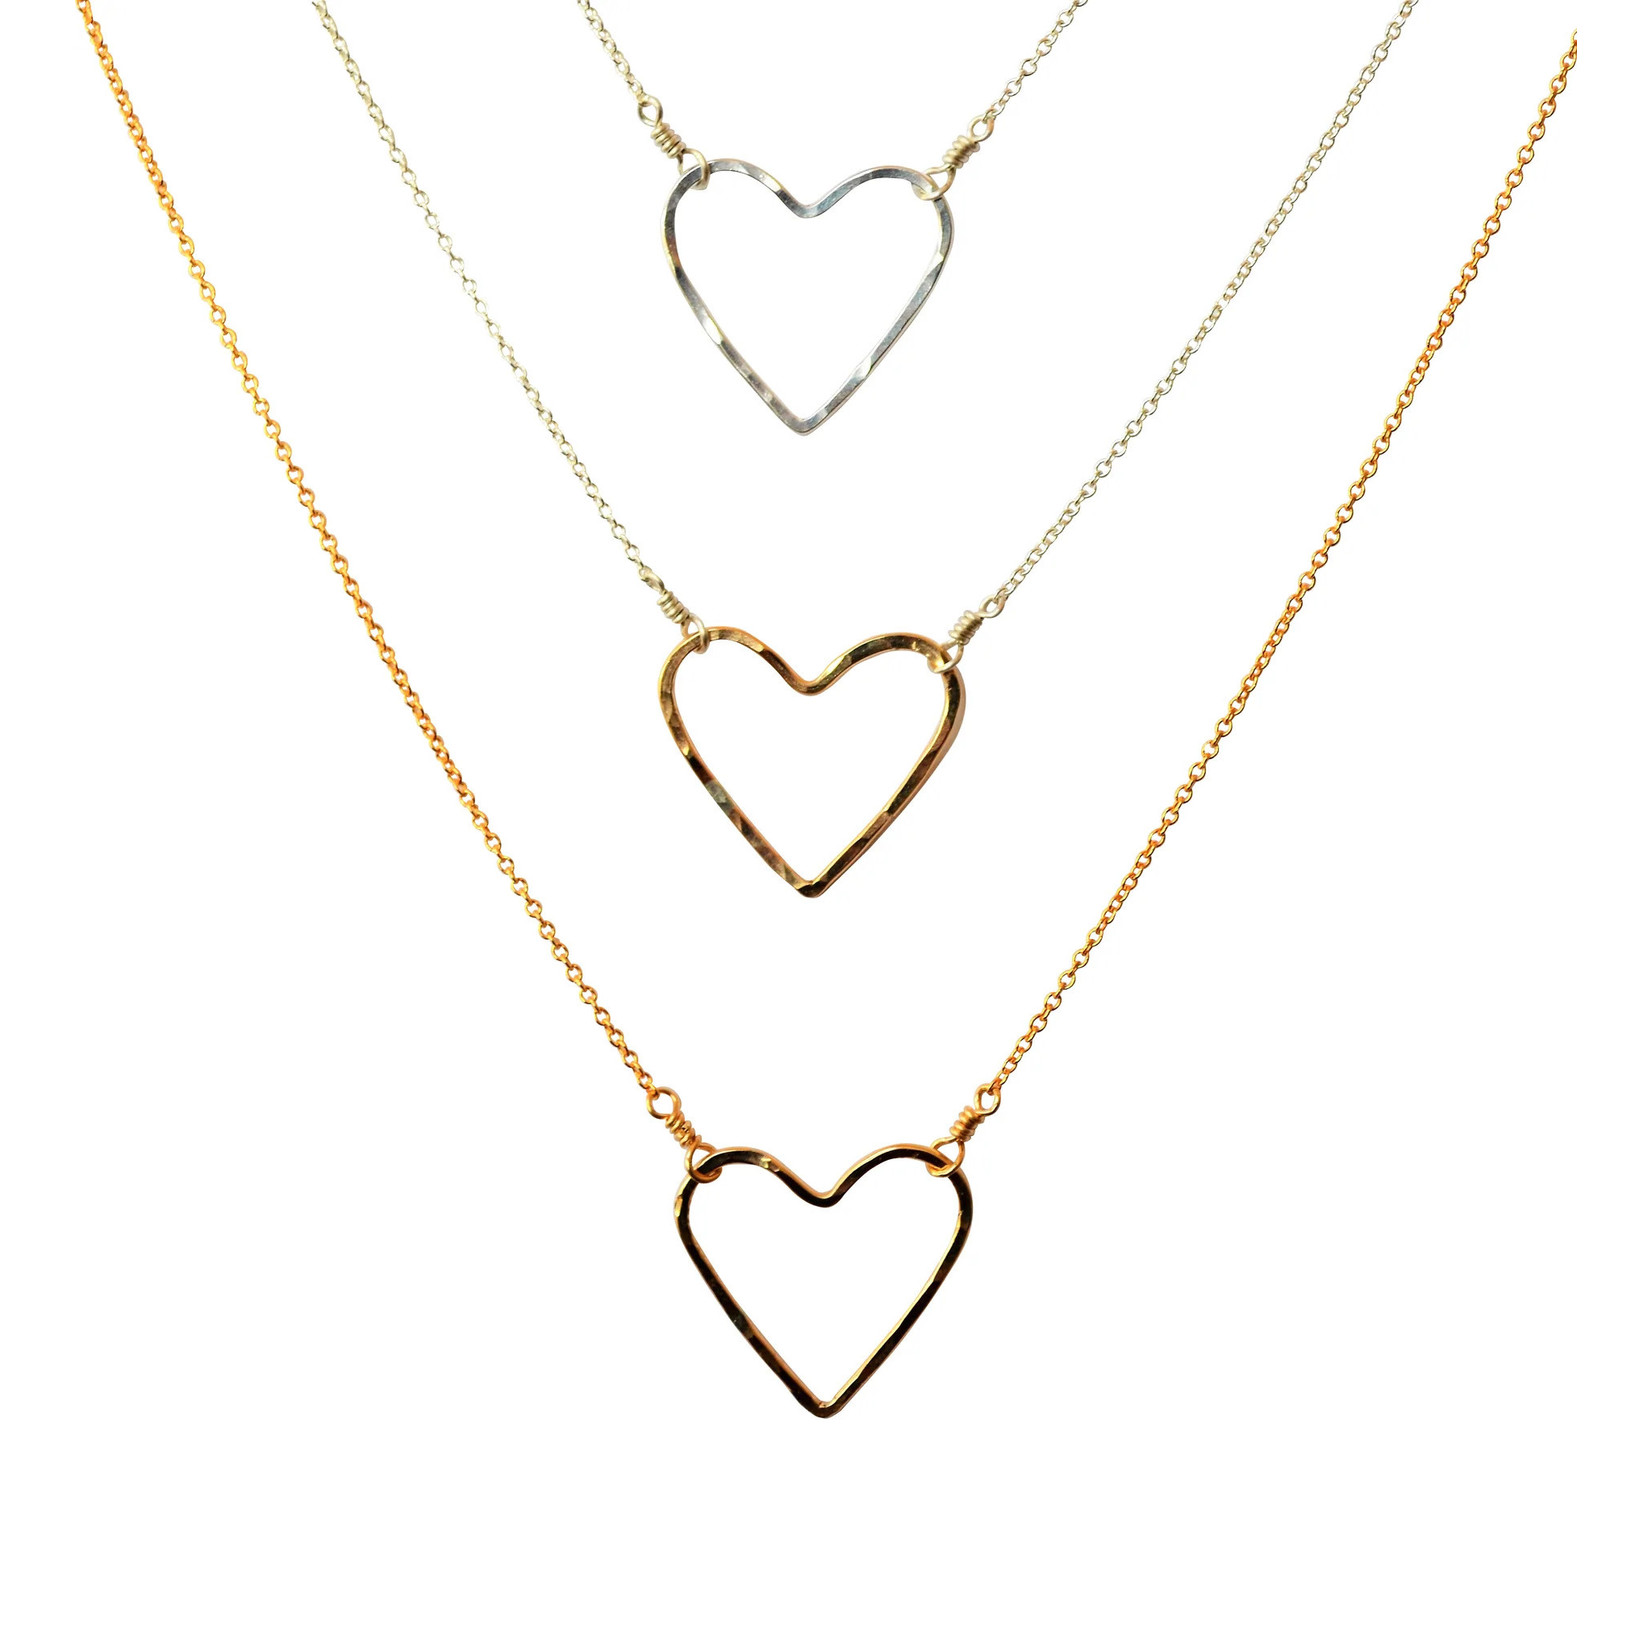 Tamacino Fig - Large Heart Necklace